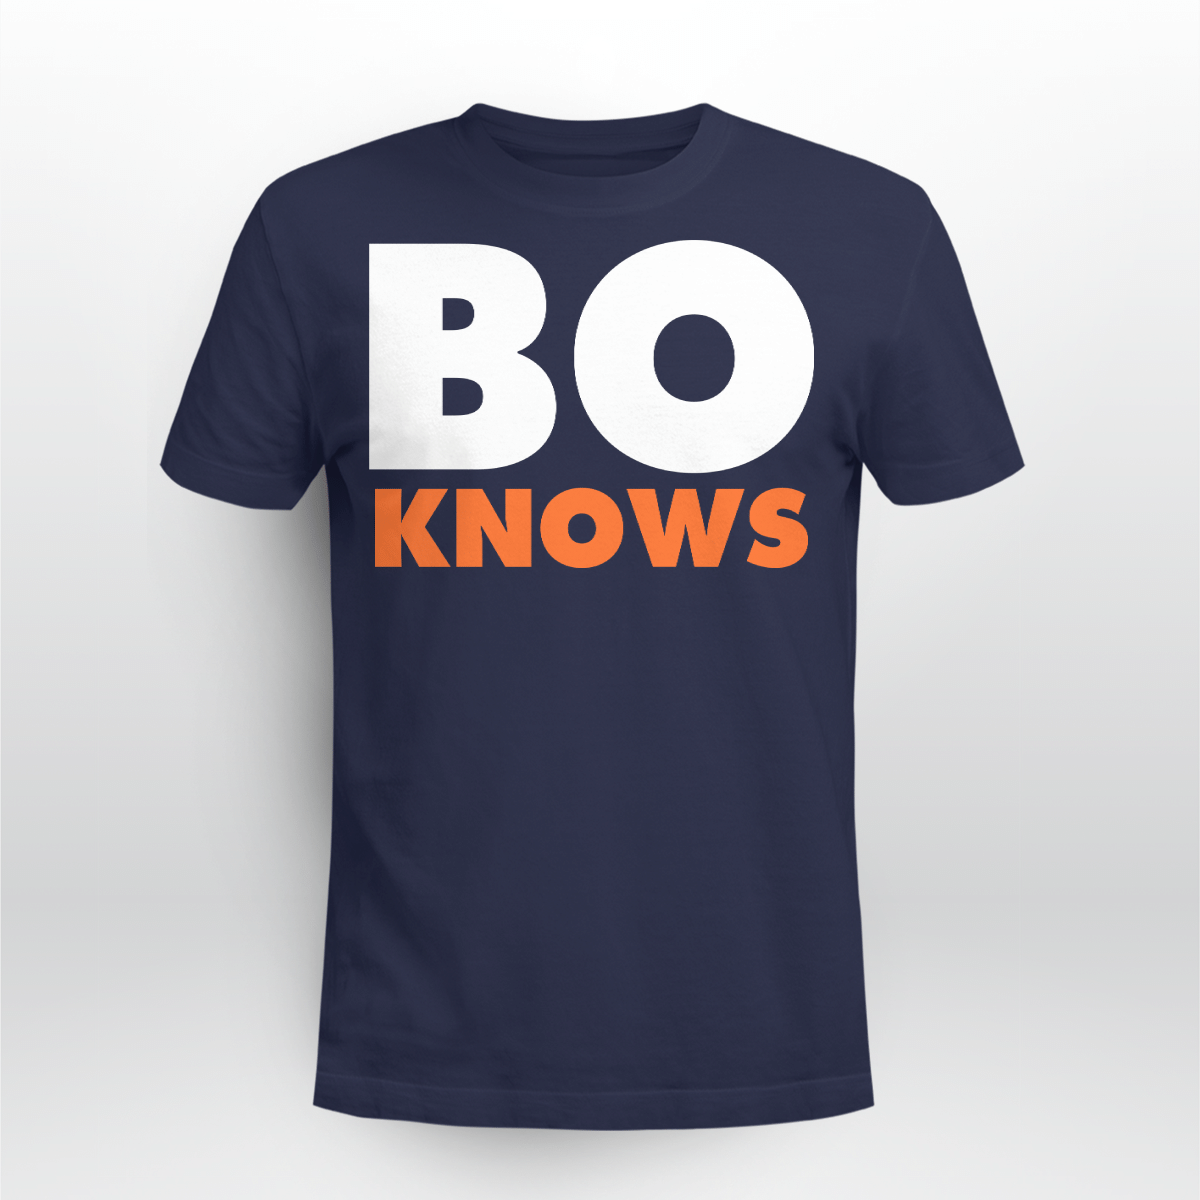 Bo Knows Shirt Style: Unisex T-shirt, Color: Navy